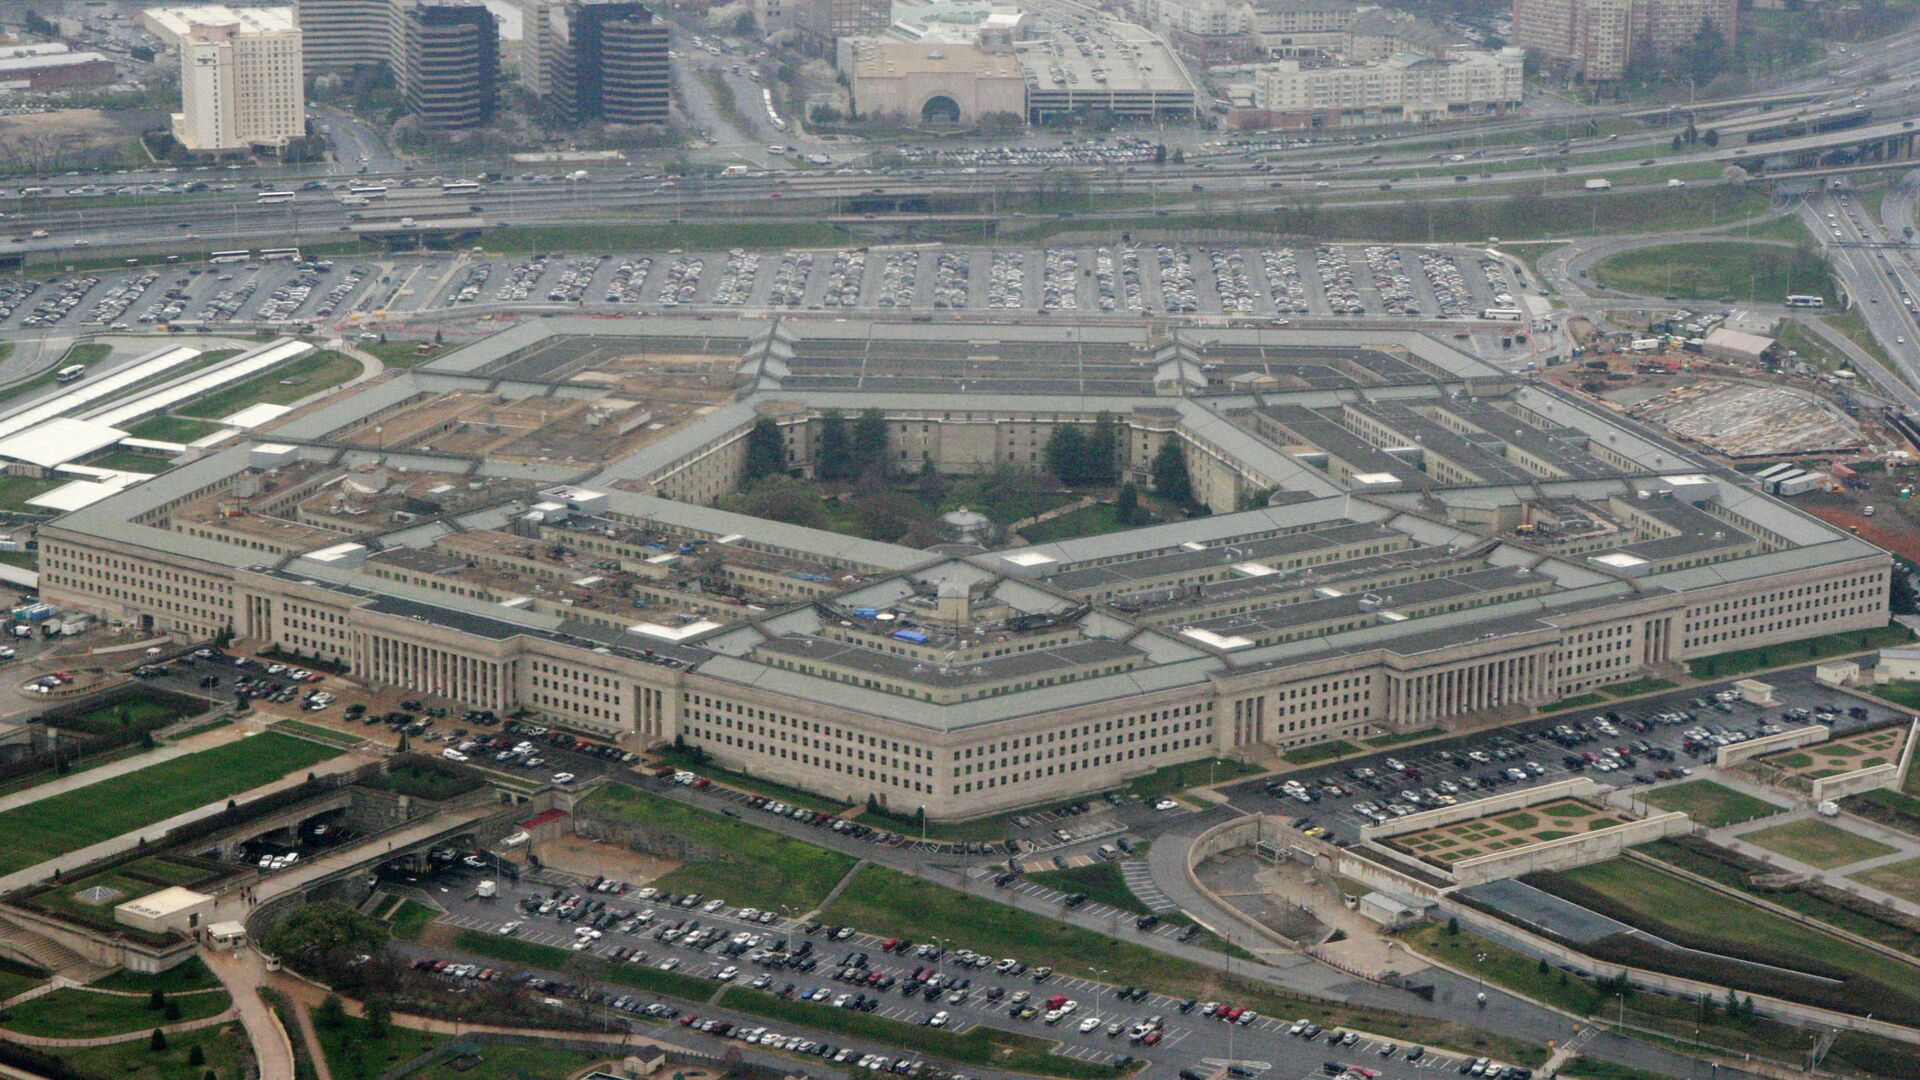 This March 27, 2008, file photo, shows the Pentagon in Washington. The Pentagon said Tuesday, July 6, 2021, that it is canceling a cloud-computing contract with Microsoft that could eventually have been worth $10 billion and will instead pursue a deal with both Microsoft and Amazon. (AP Photo/Charles Dharapak, File) - Sputnik International, 1920, 13.09.2021